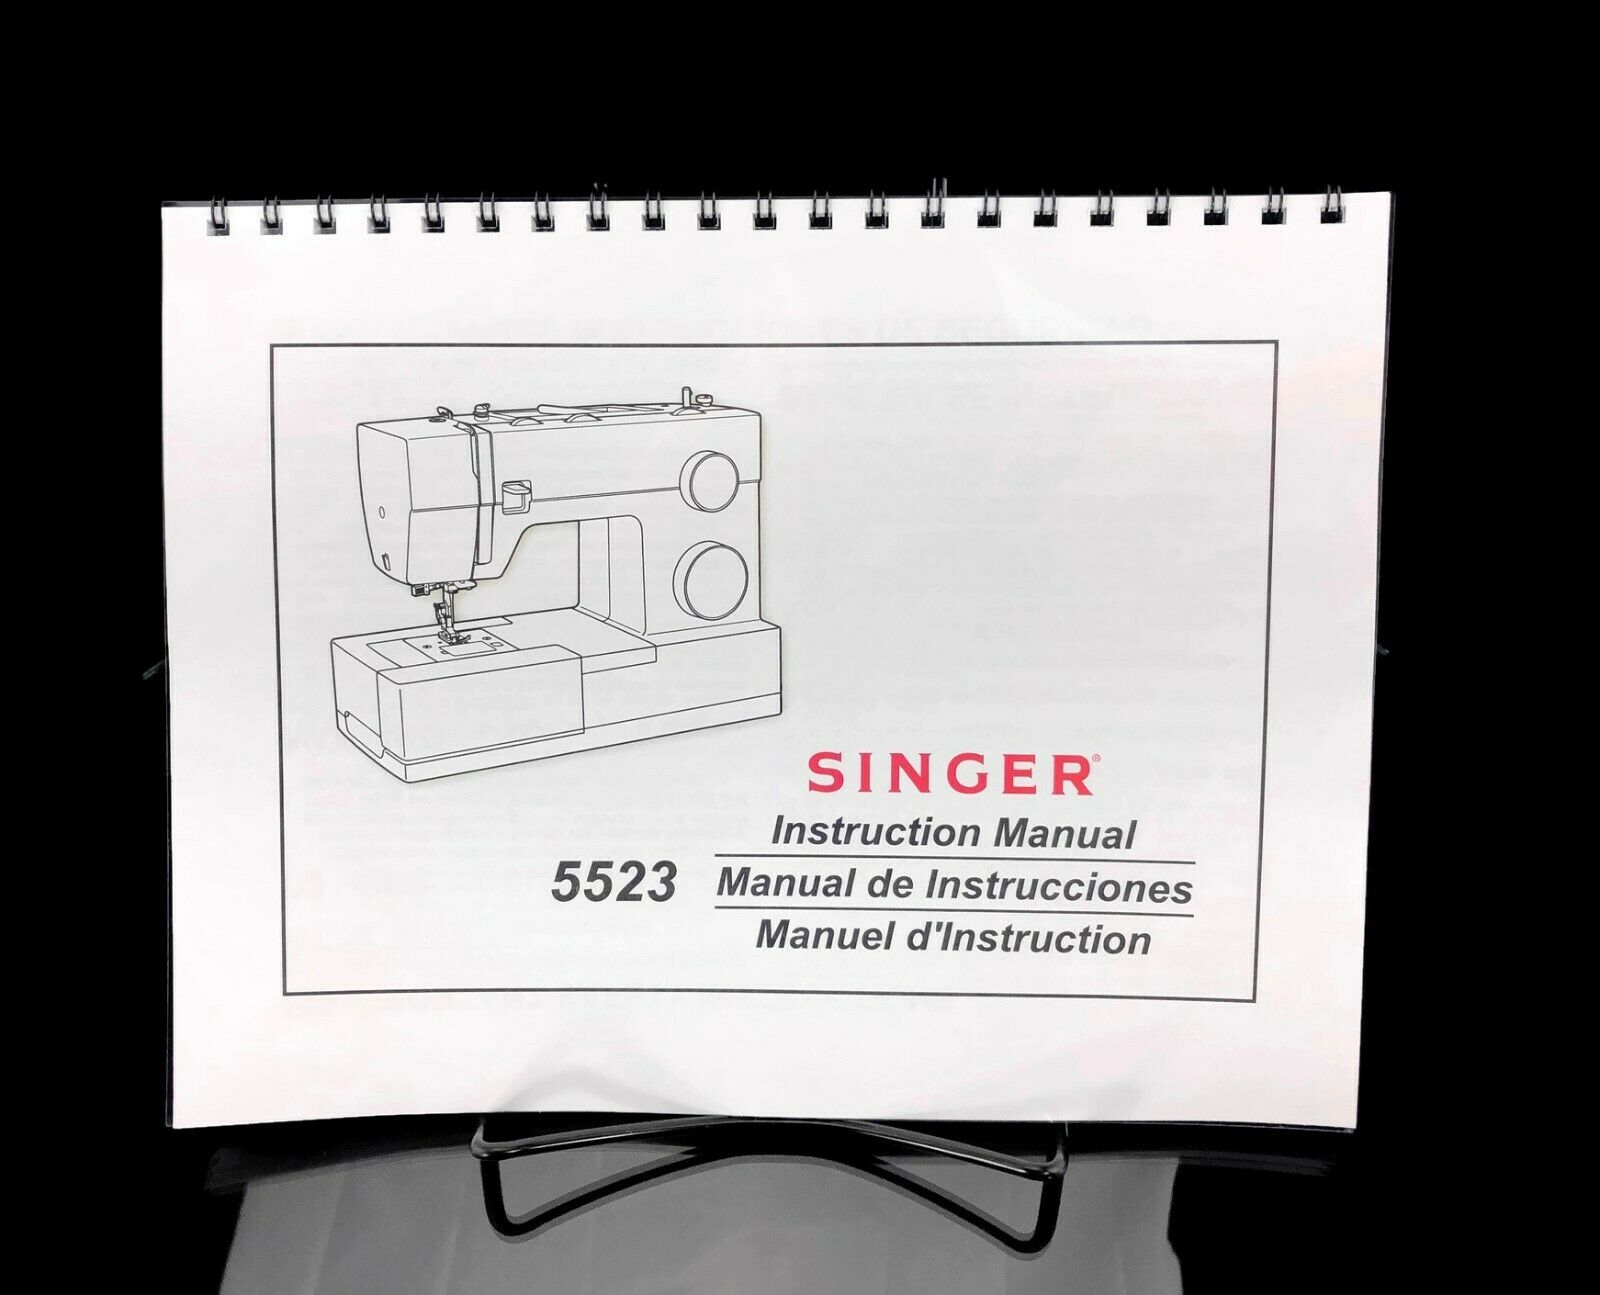 Singer 5523 Sewing Machine Instructions Manual User Guide Copy Reprint